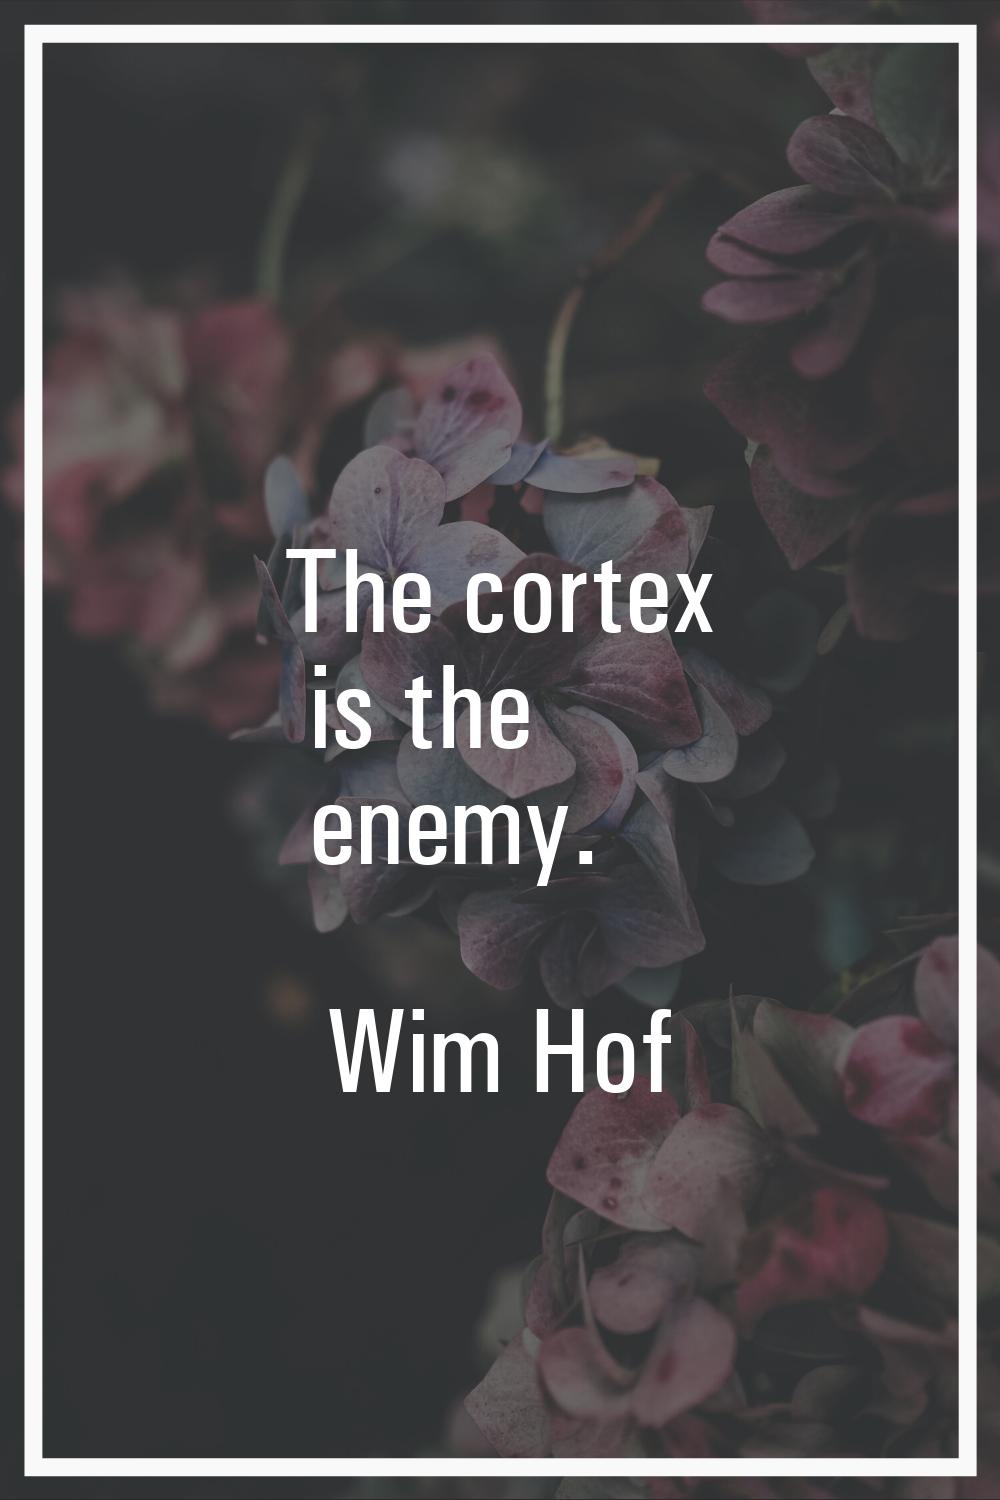 The cortex is the enemy.